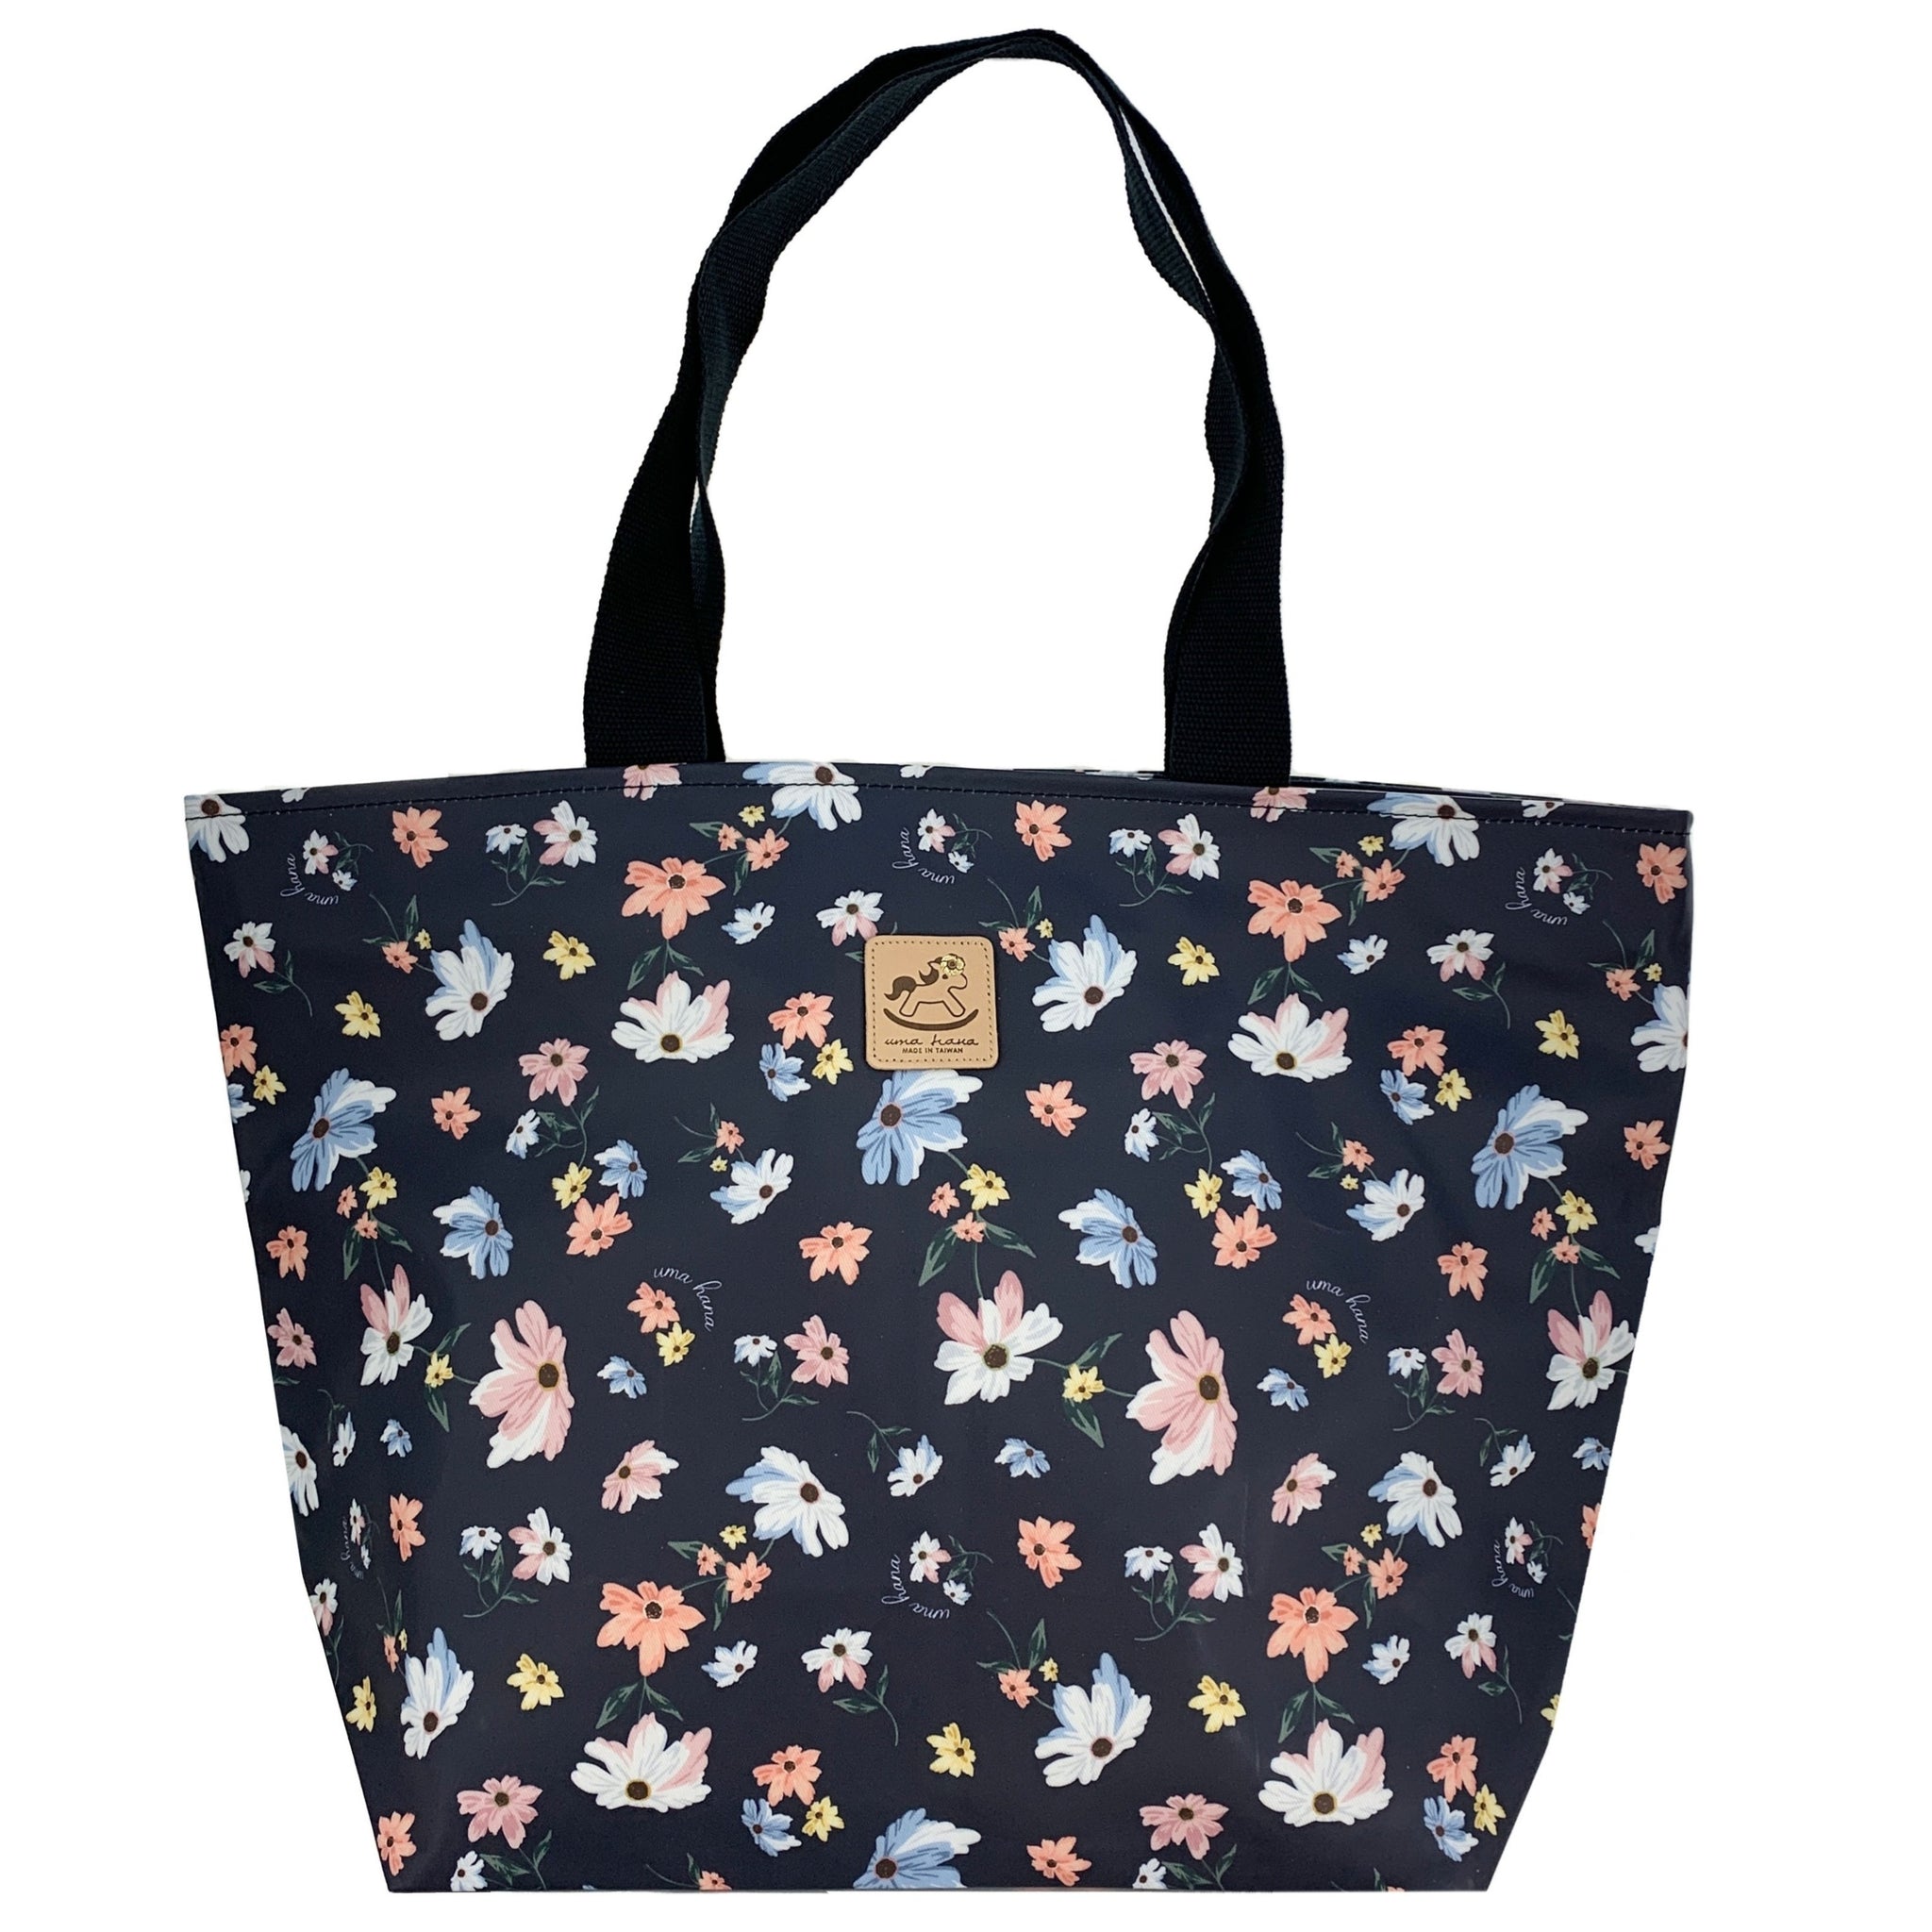 Black Floral Meadows Large Travel Tote